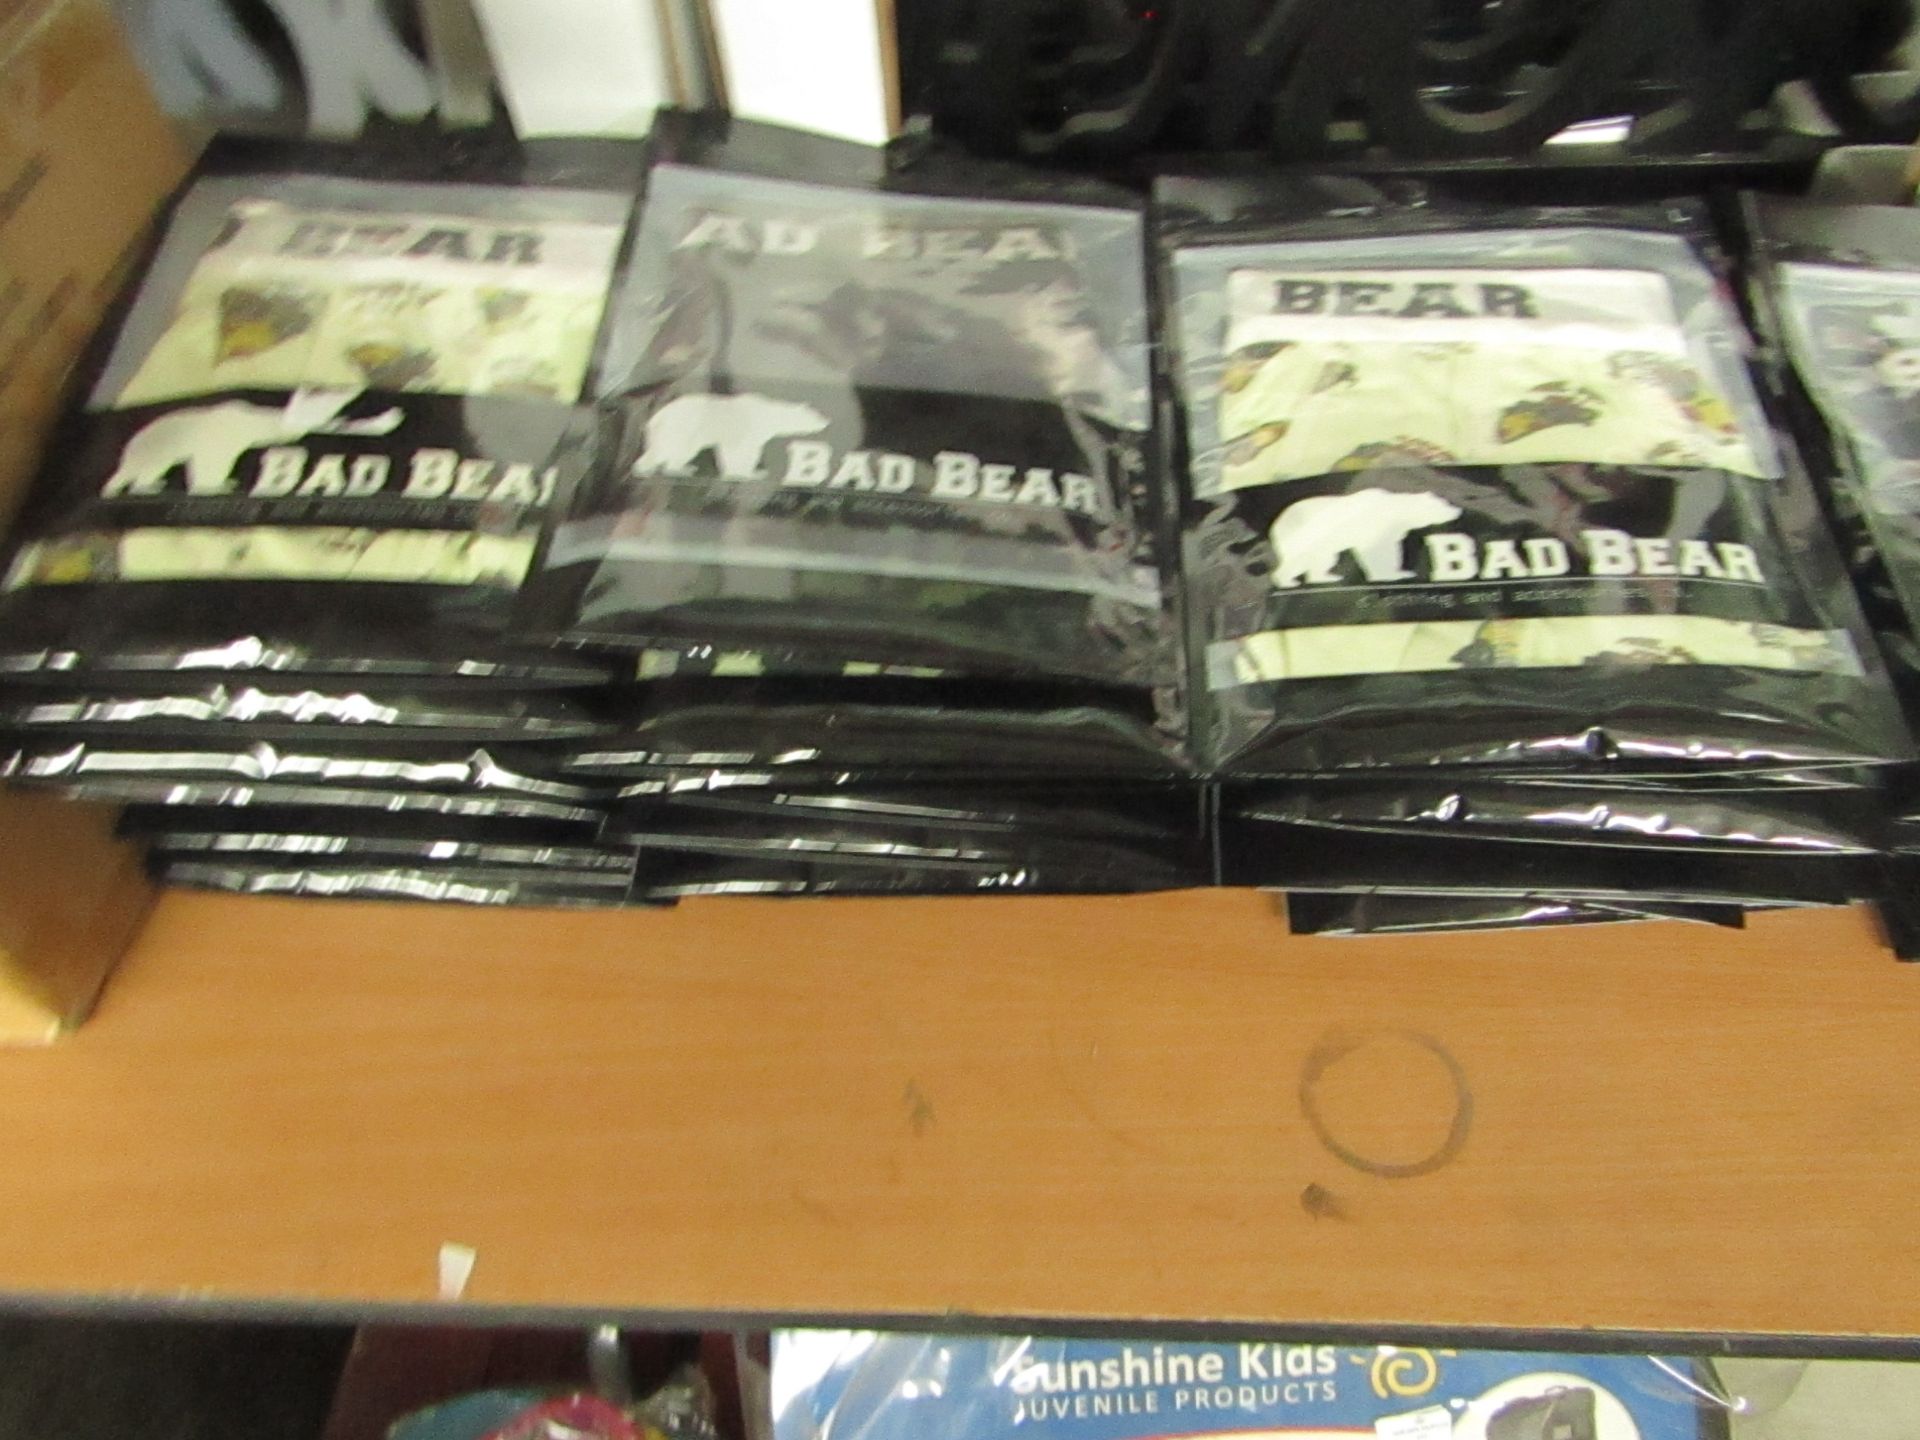 30x Bad Bear - Mens Boxer Briefs - Assorted Colours & Sizes - Unused & Packaged.